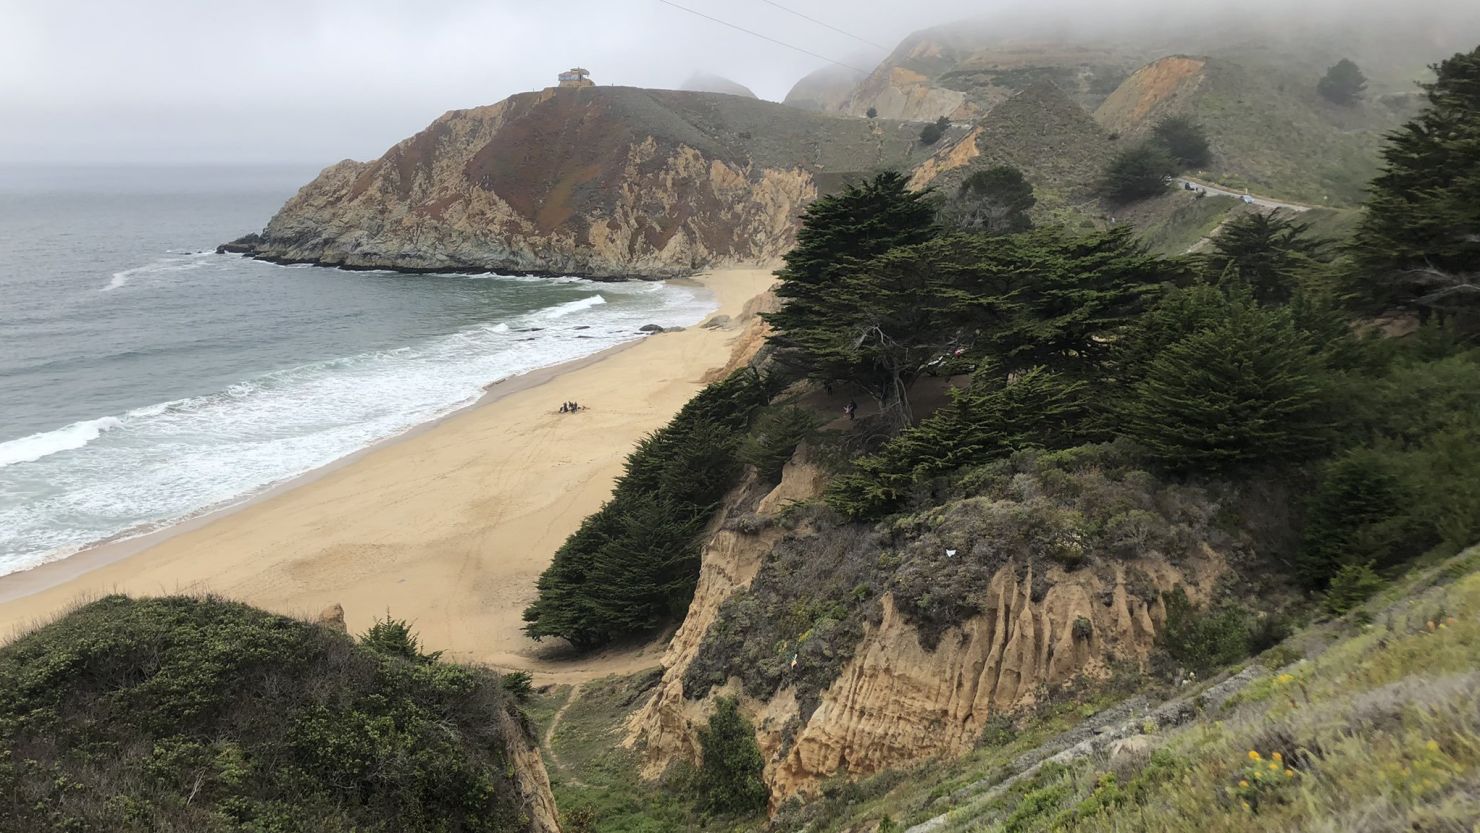 A 35-year-old man was hospitalized Saturday for a shark bite at Grey Whale Cove State Beach, according to the San Mateo County Sheriff's Office